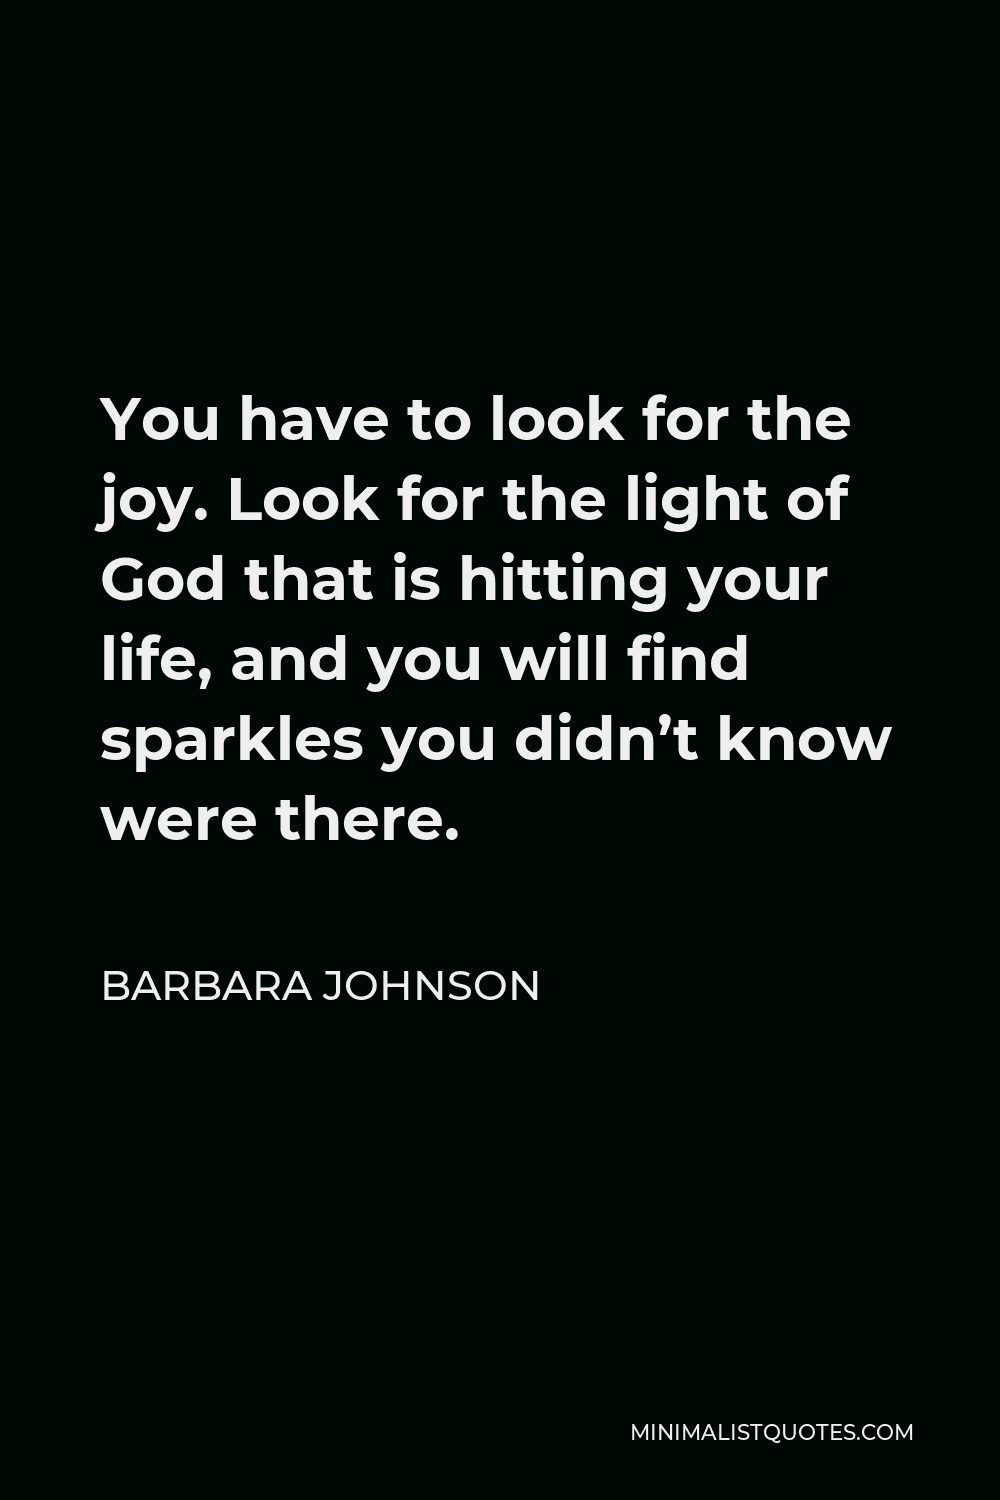 Barbara Johnson Quote - You have to look for the joy. Look for the light of God that is hitting your life, and you will find sparkles you didn’t know were there.